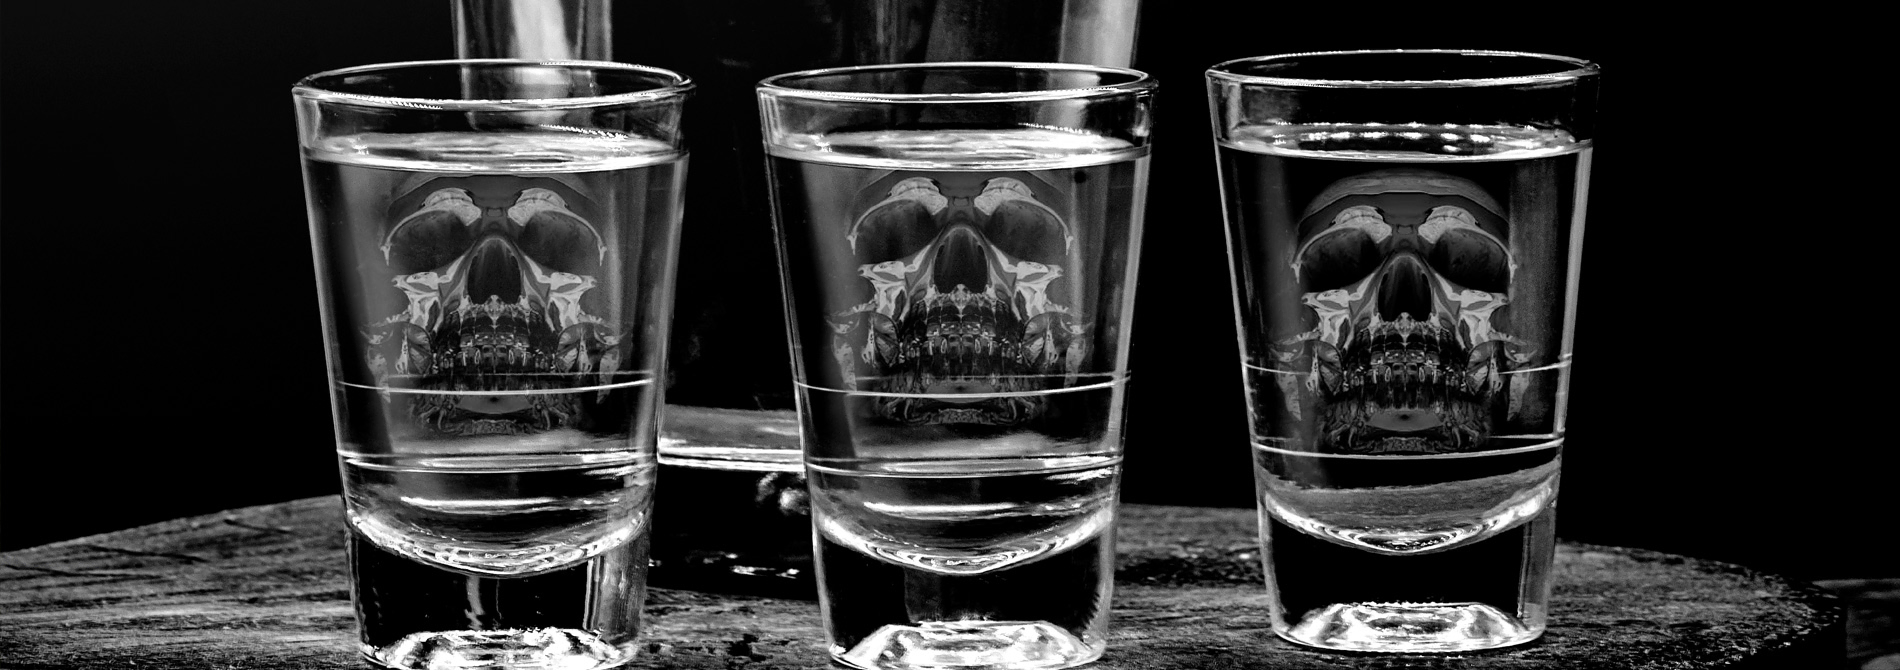 shot glasses with skulls in them depicting death